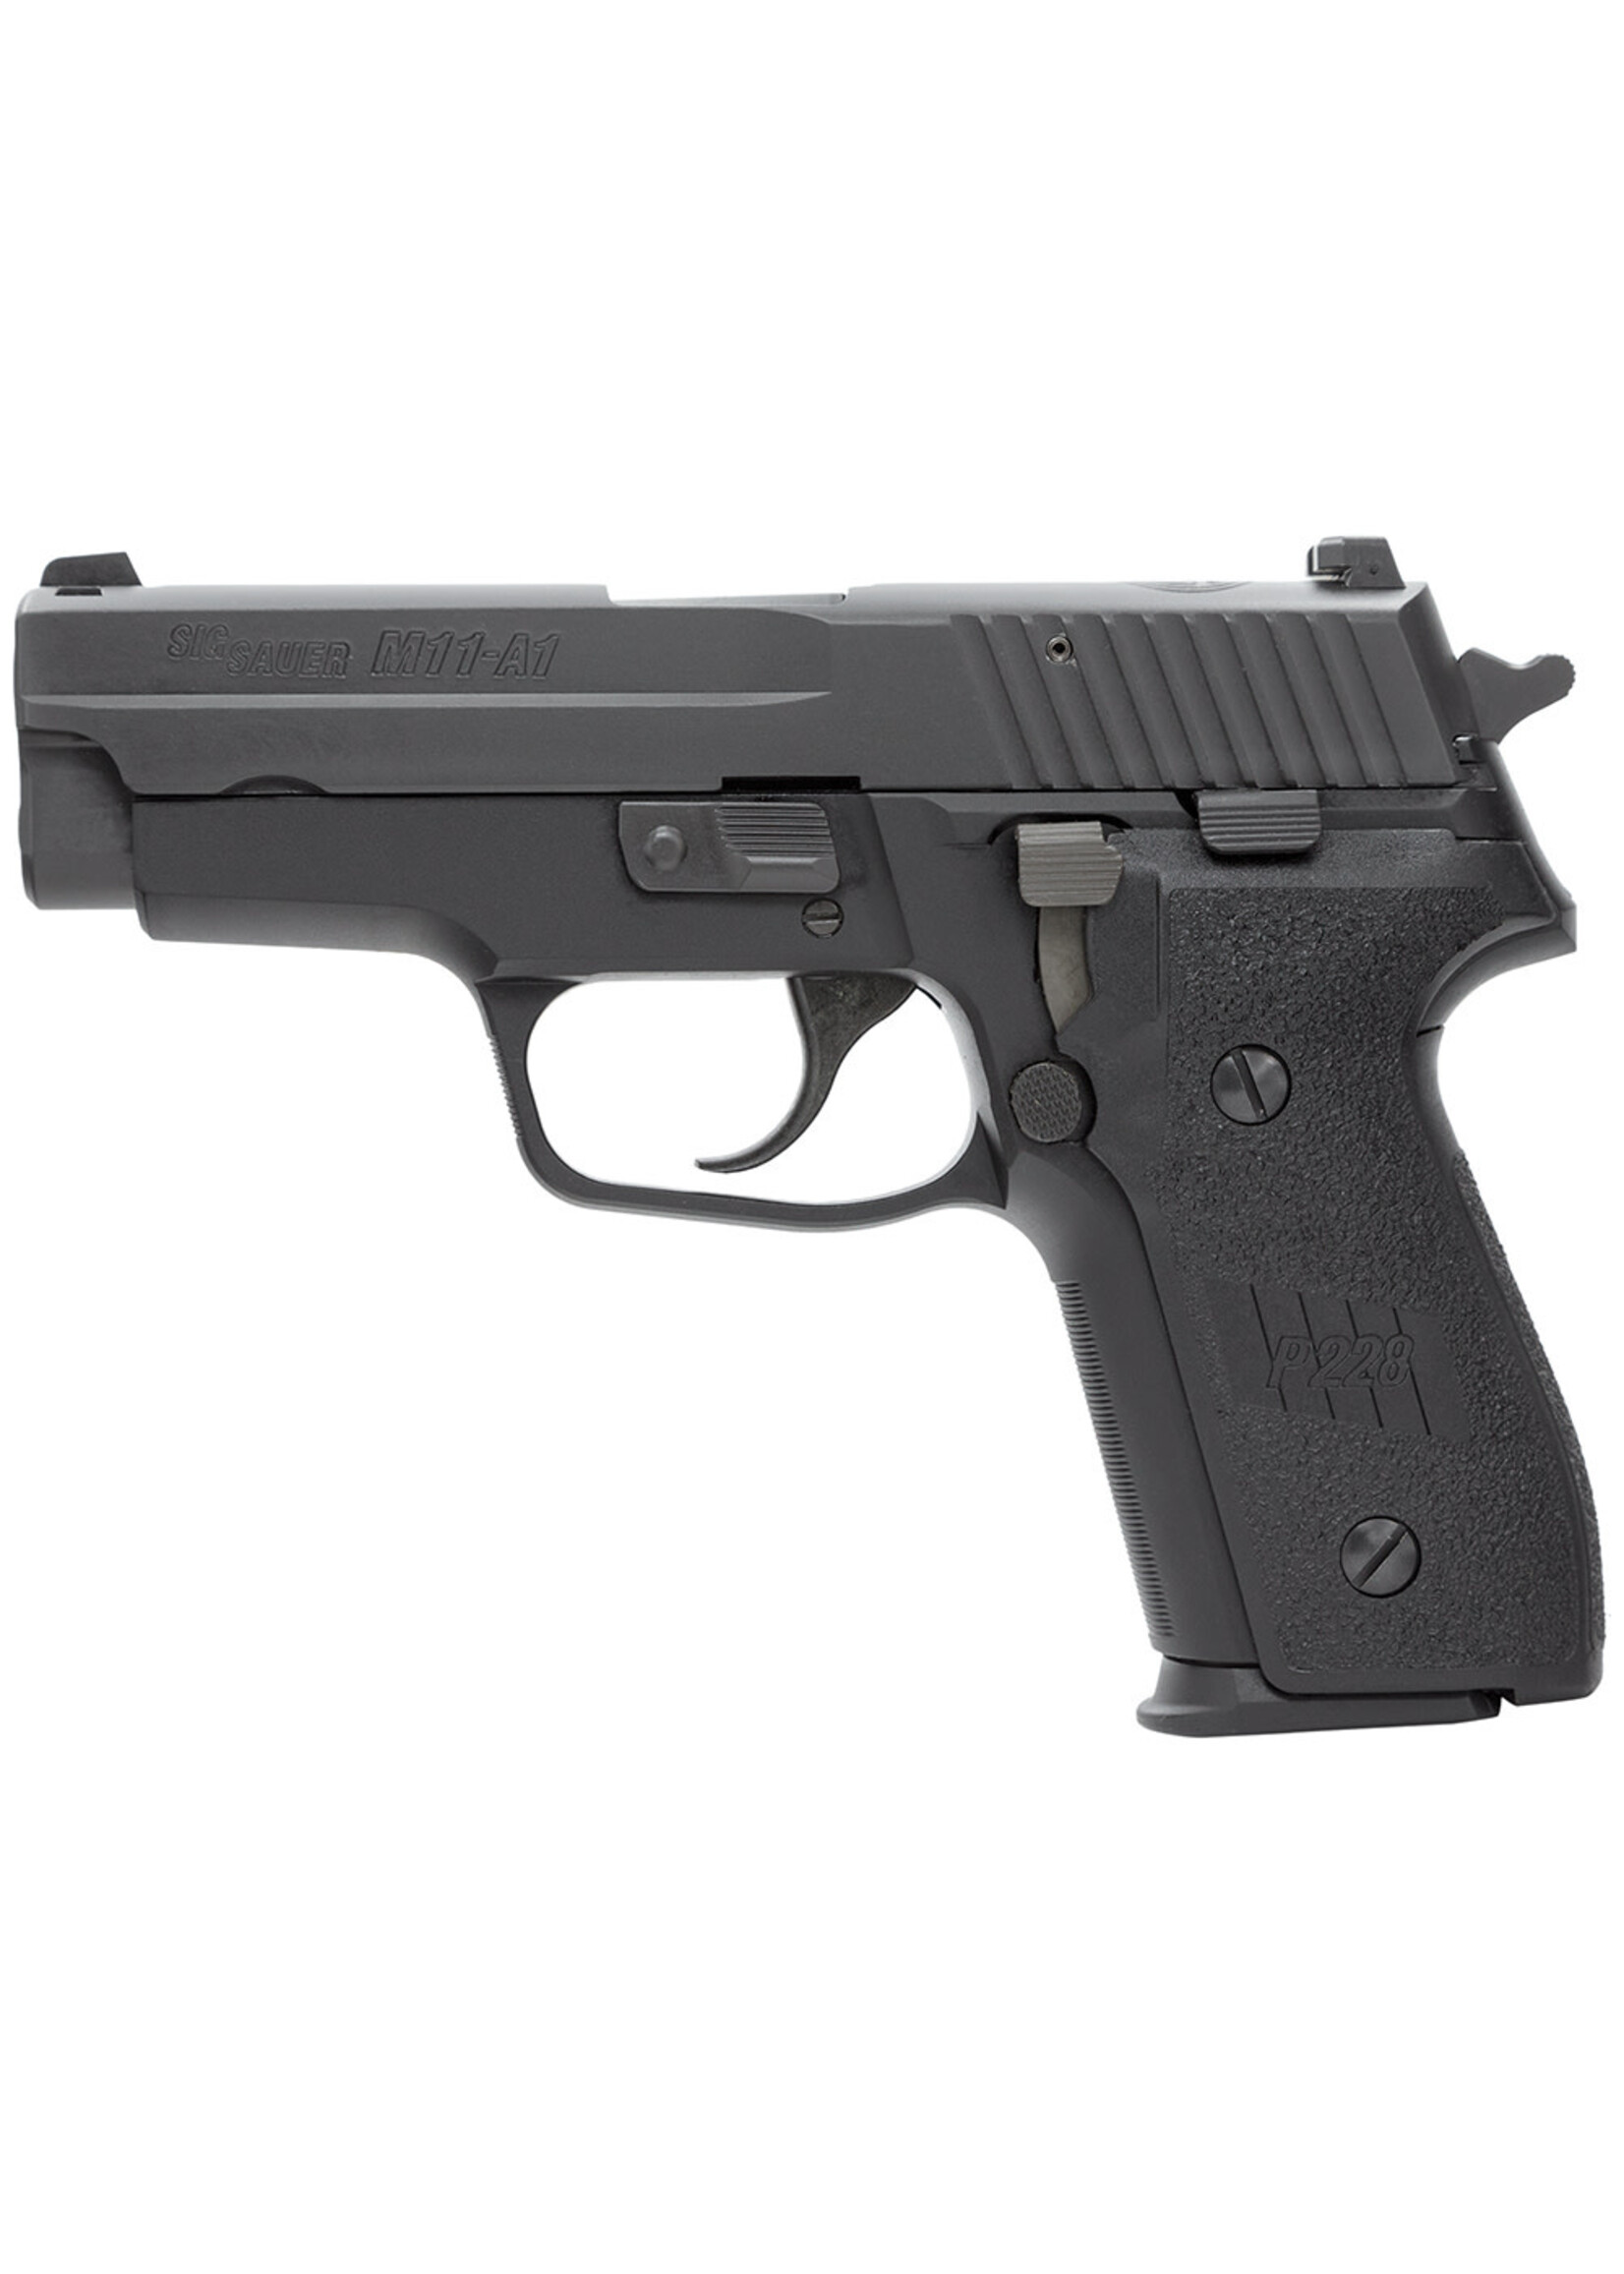 Sig Sauer Sig Sauer M11A1 P229 M11A1 9mm Luger Caliber with 3.90" Barrel, 15+1 Capacity, Black Hardcoat Anodized Finish Aluminum Frame, Serrated Black Nitron Stainless Steel Slide, Polymer Grip & Siglite Night Sights